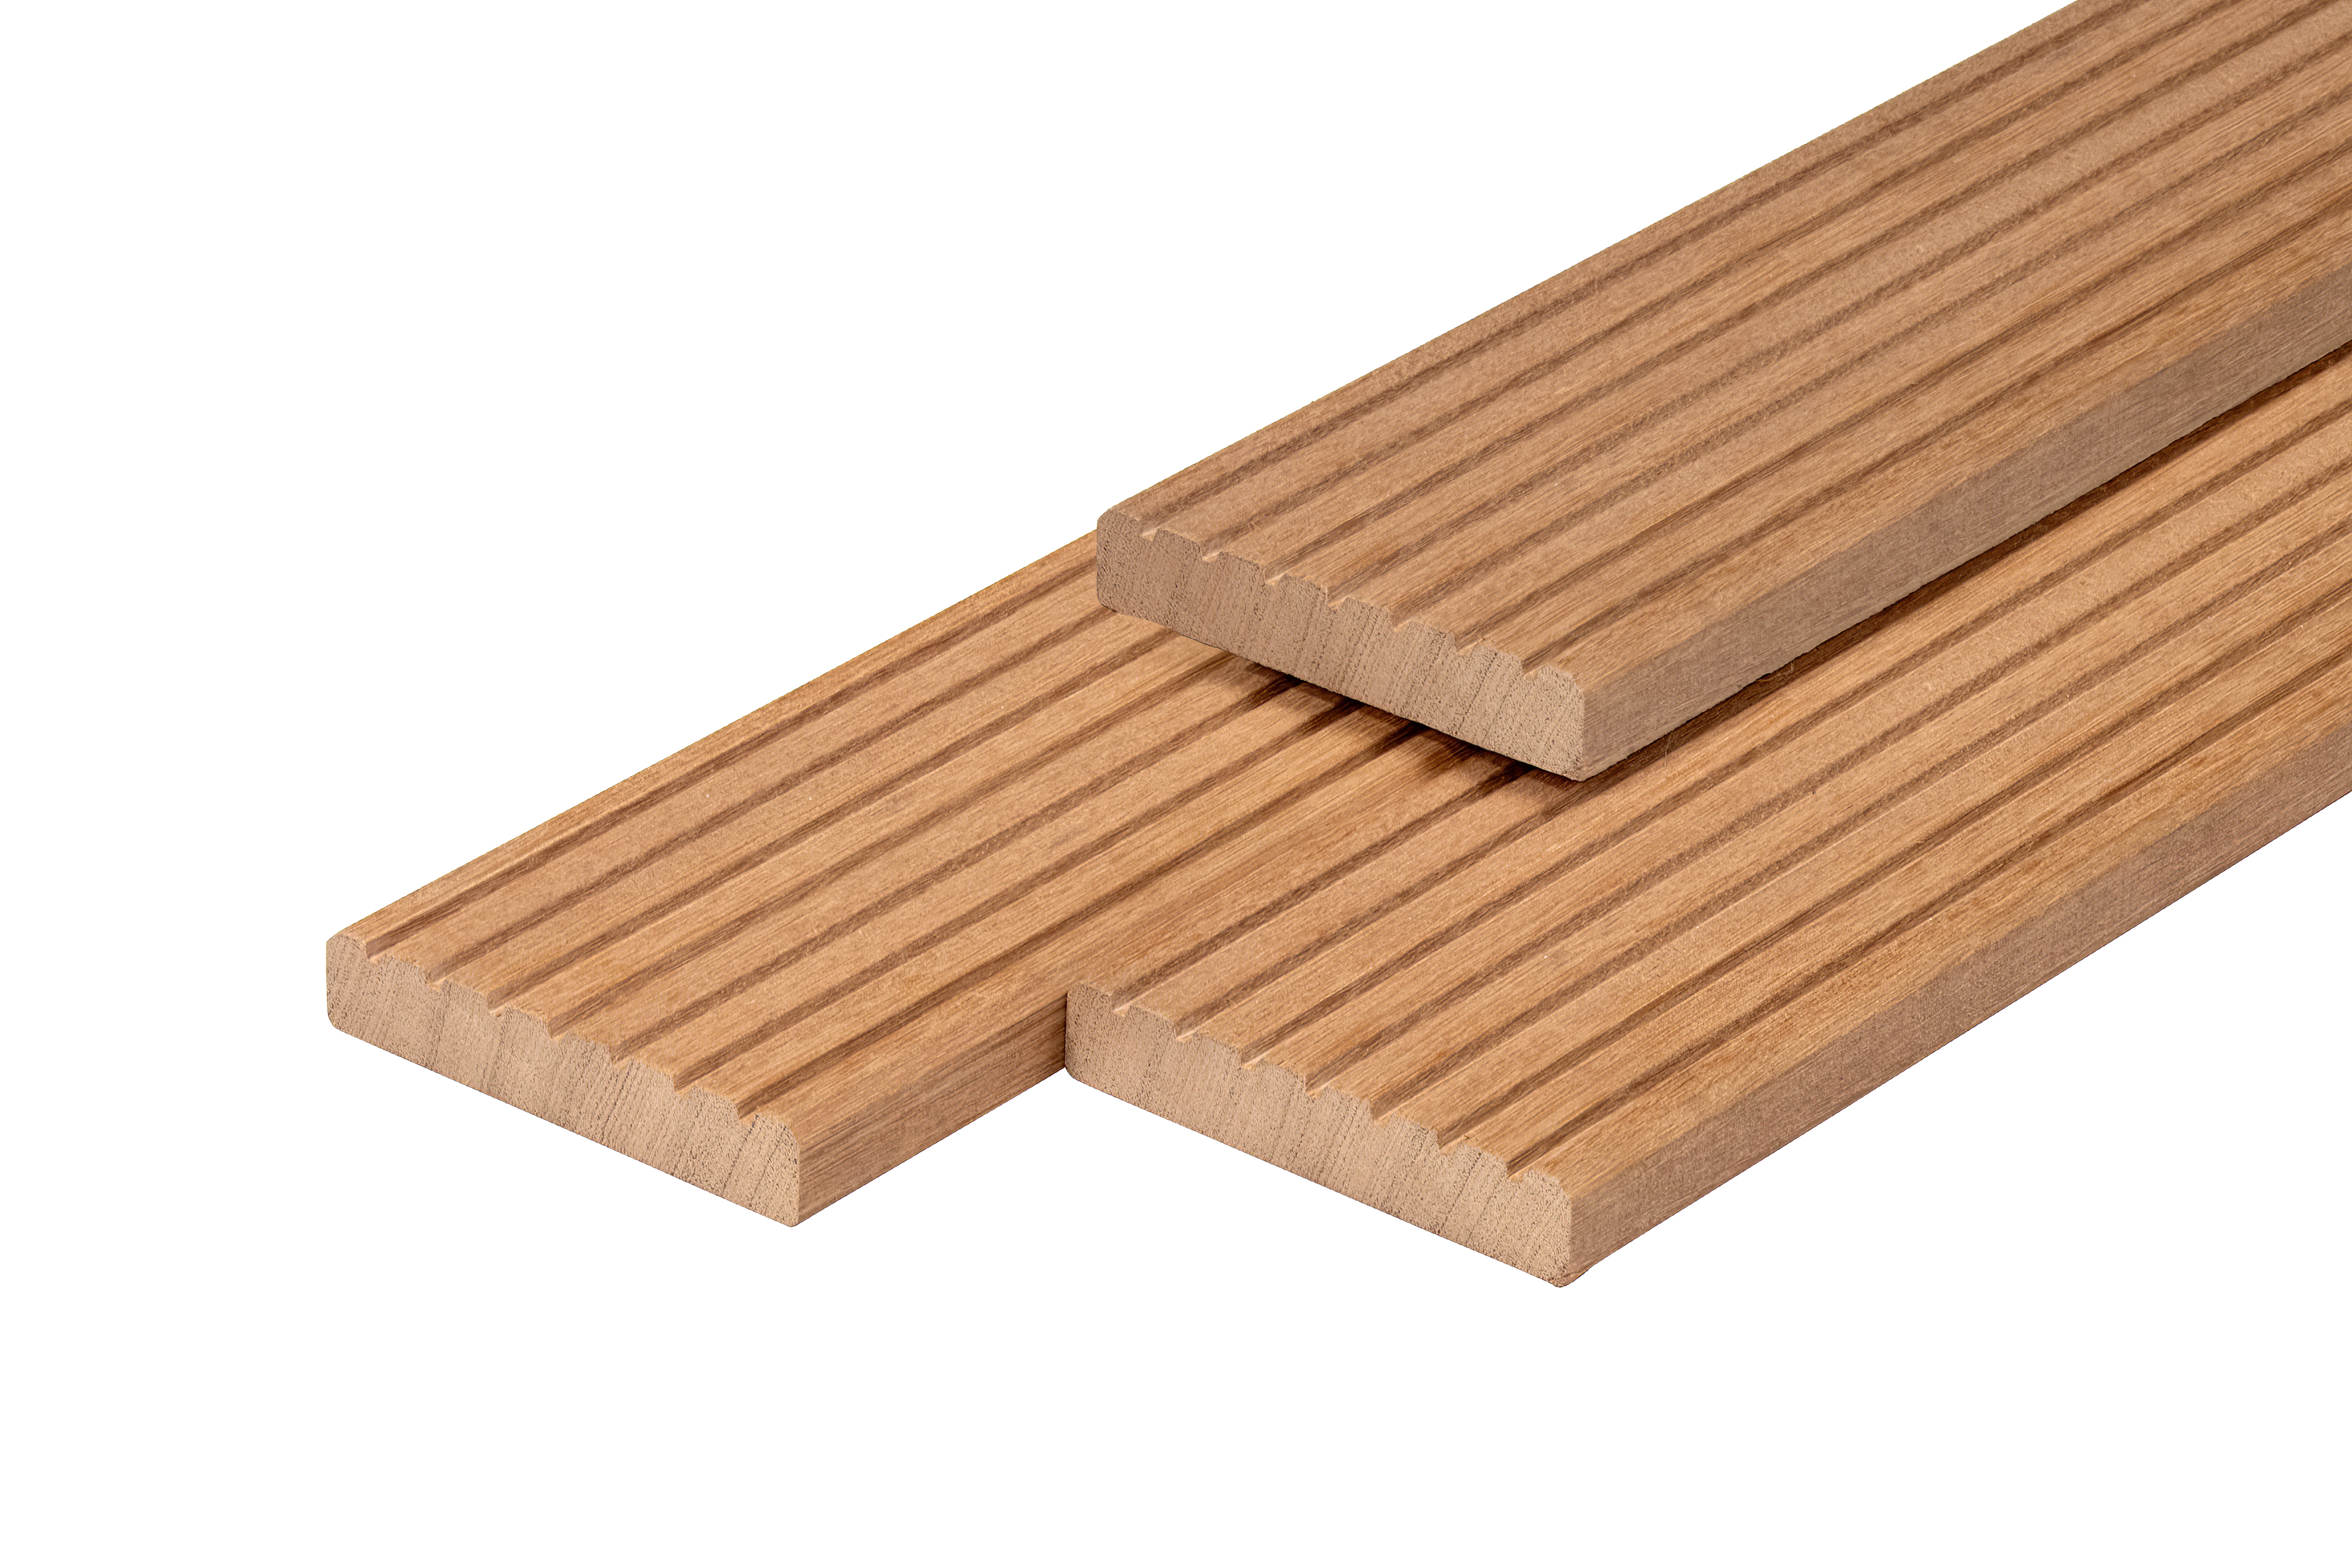 Bangkirai decking board dried 2.5x14.5x430 cm planed 7 grooves + 1 side smooth